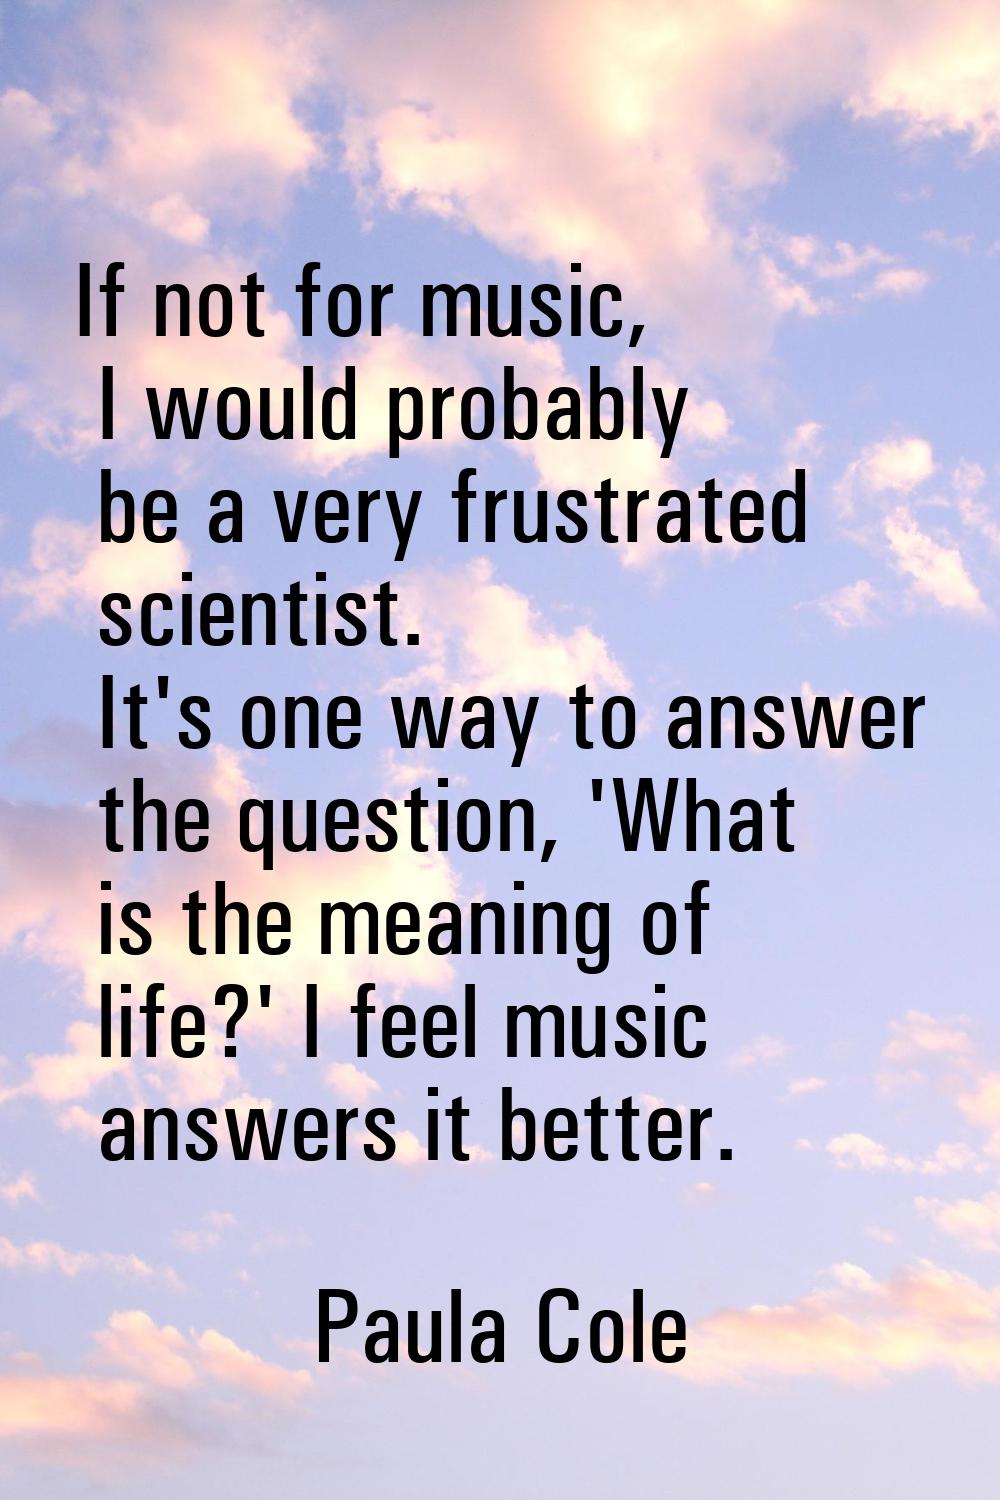 If not for music, I would probably be a very frustrated scientist. It's one way to answer the quest